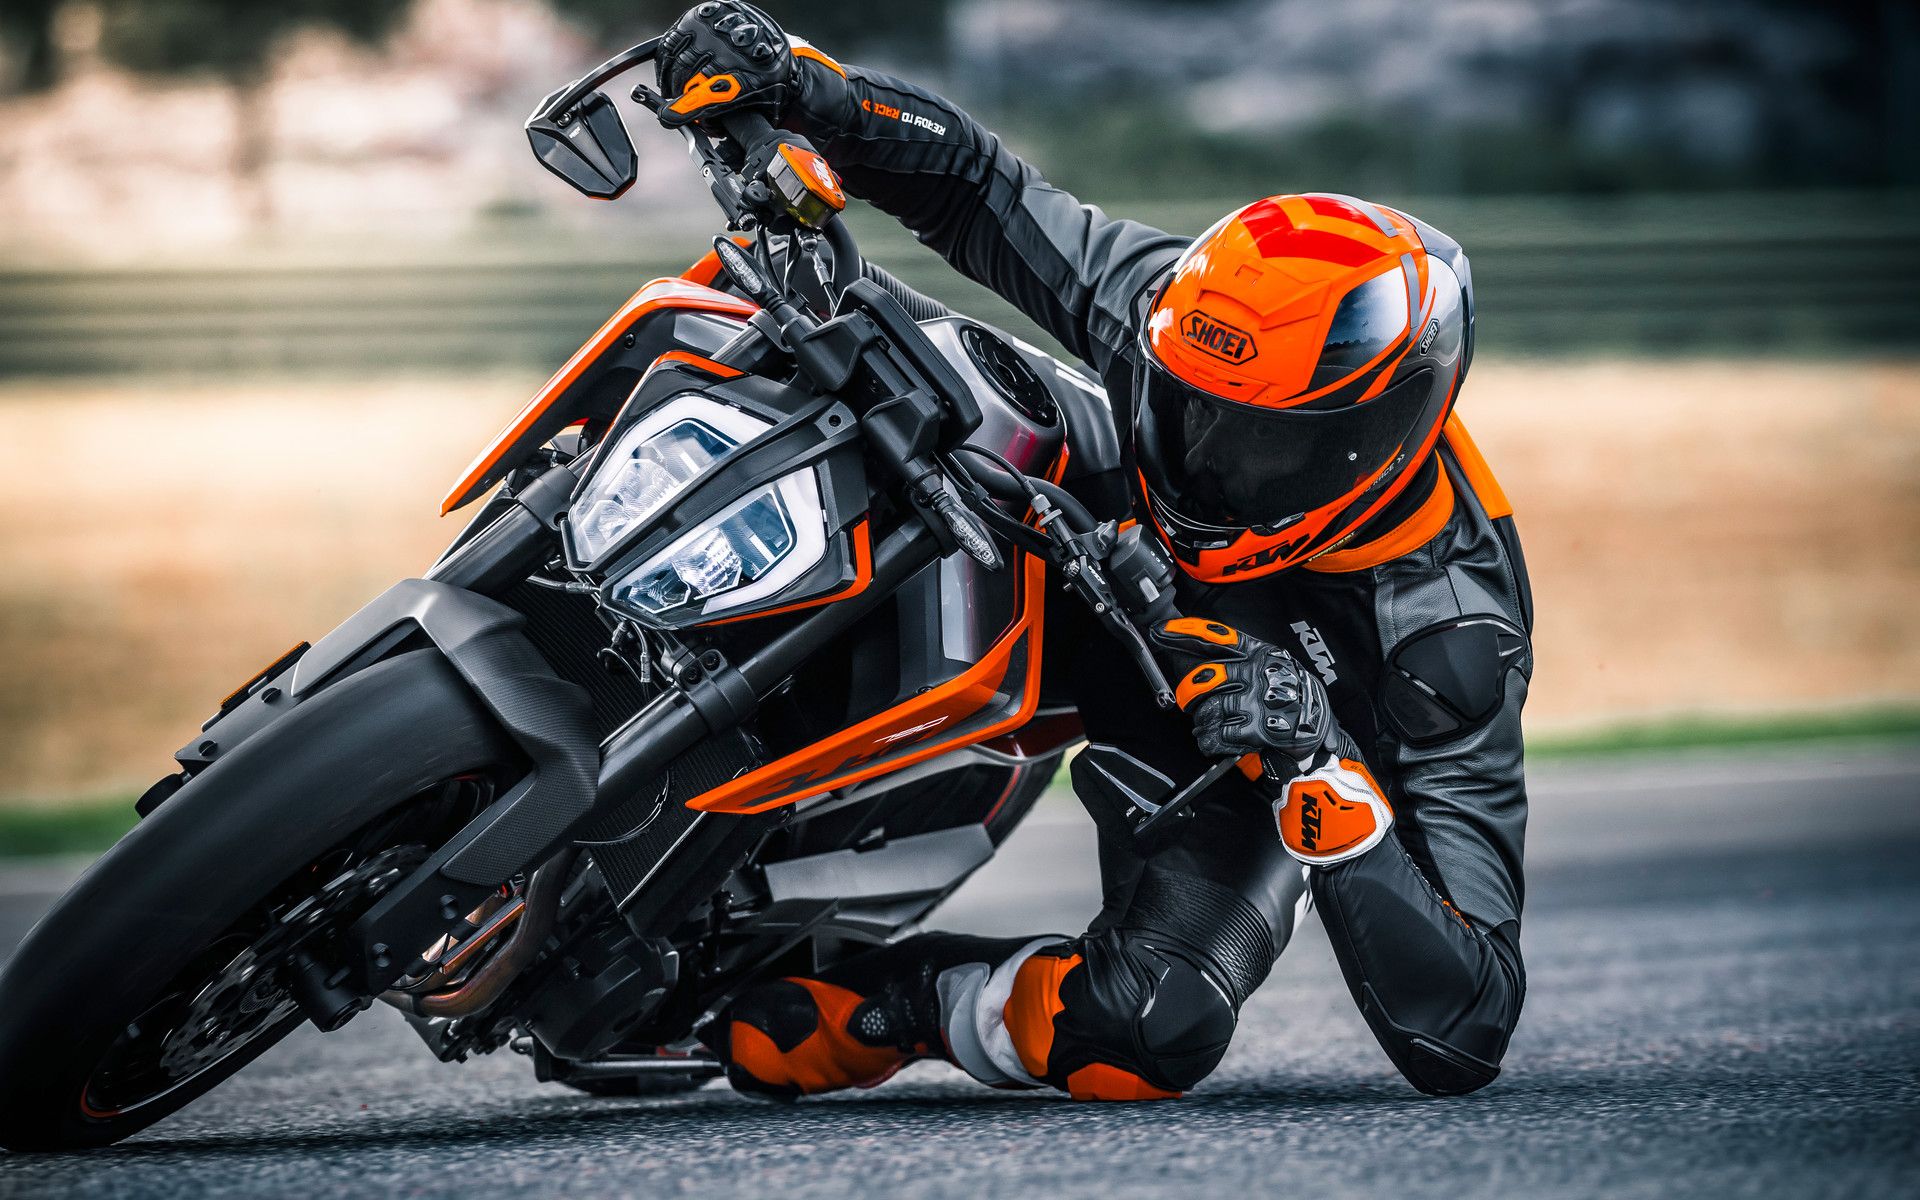  This Duke borrows many gizmos from its eldest sibling, the Super Duke R